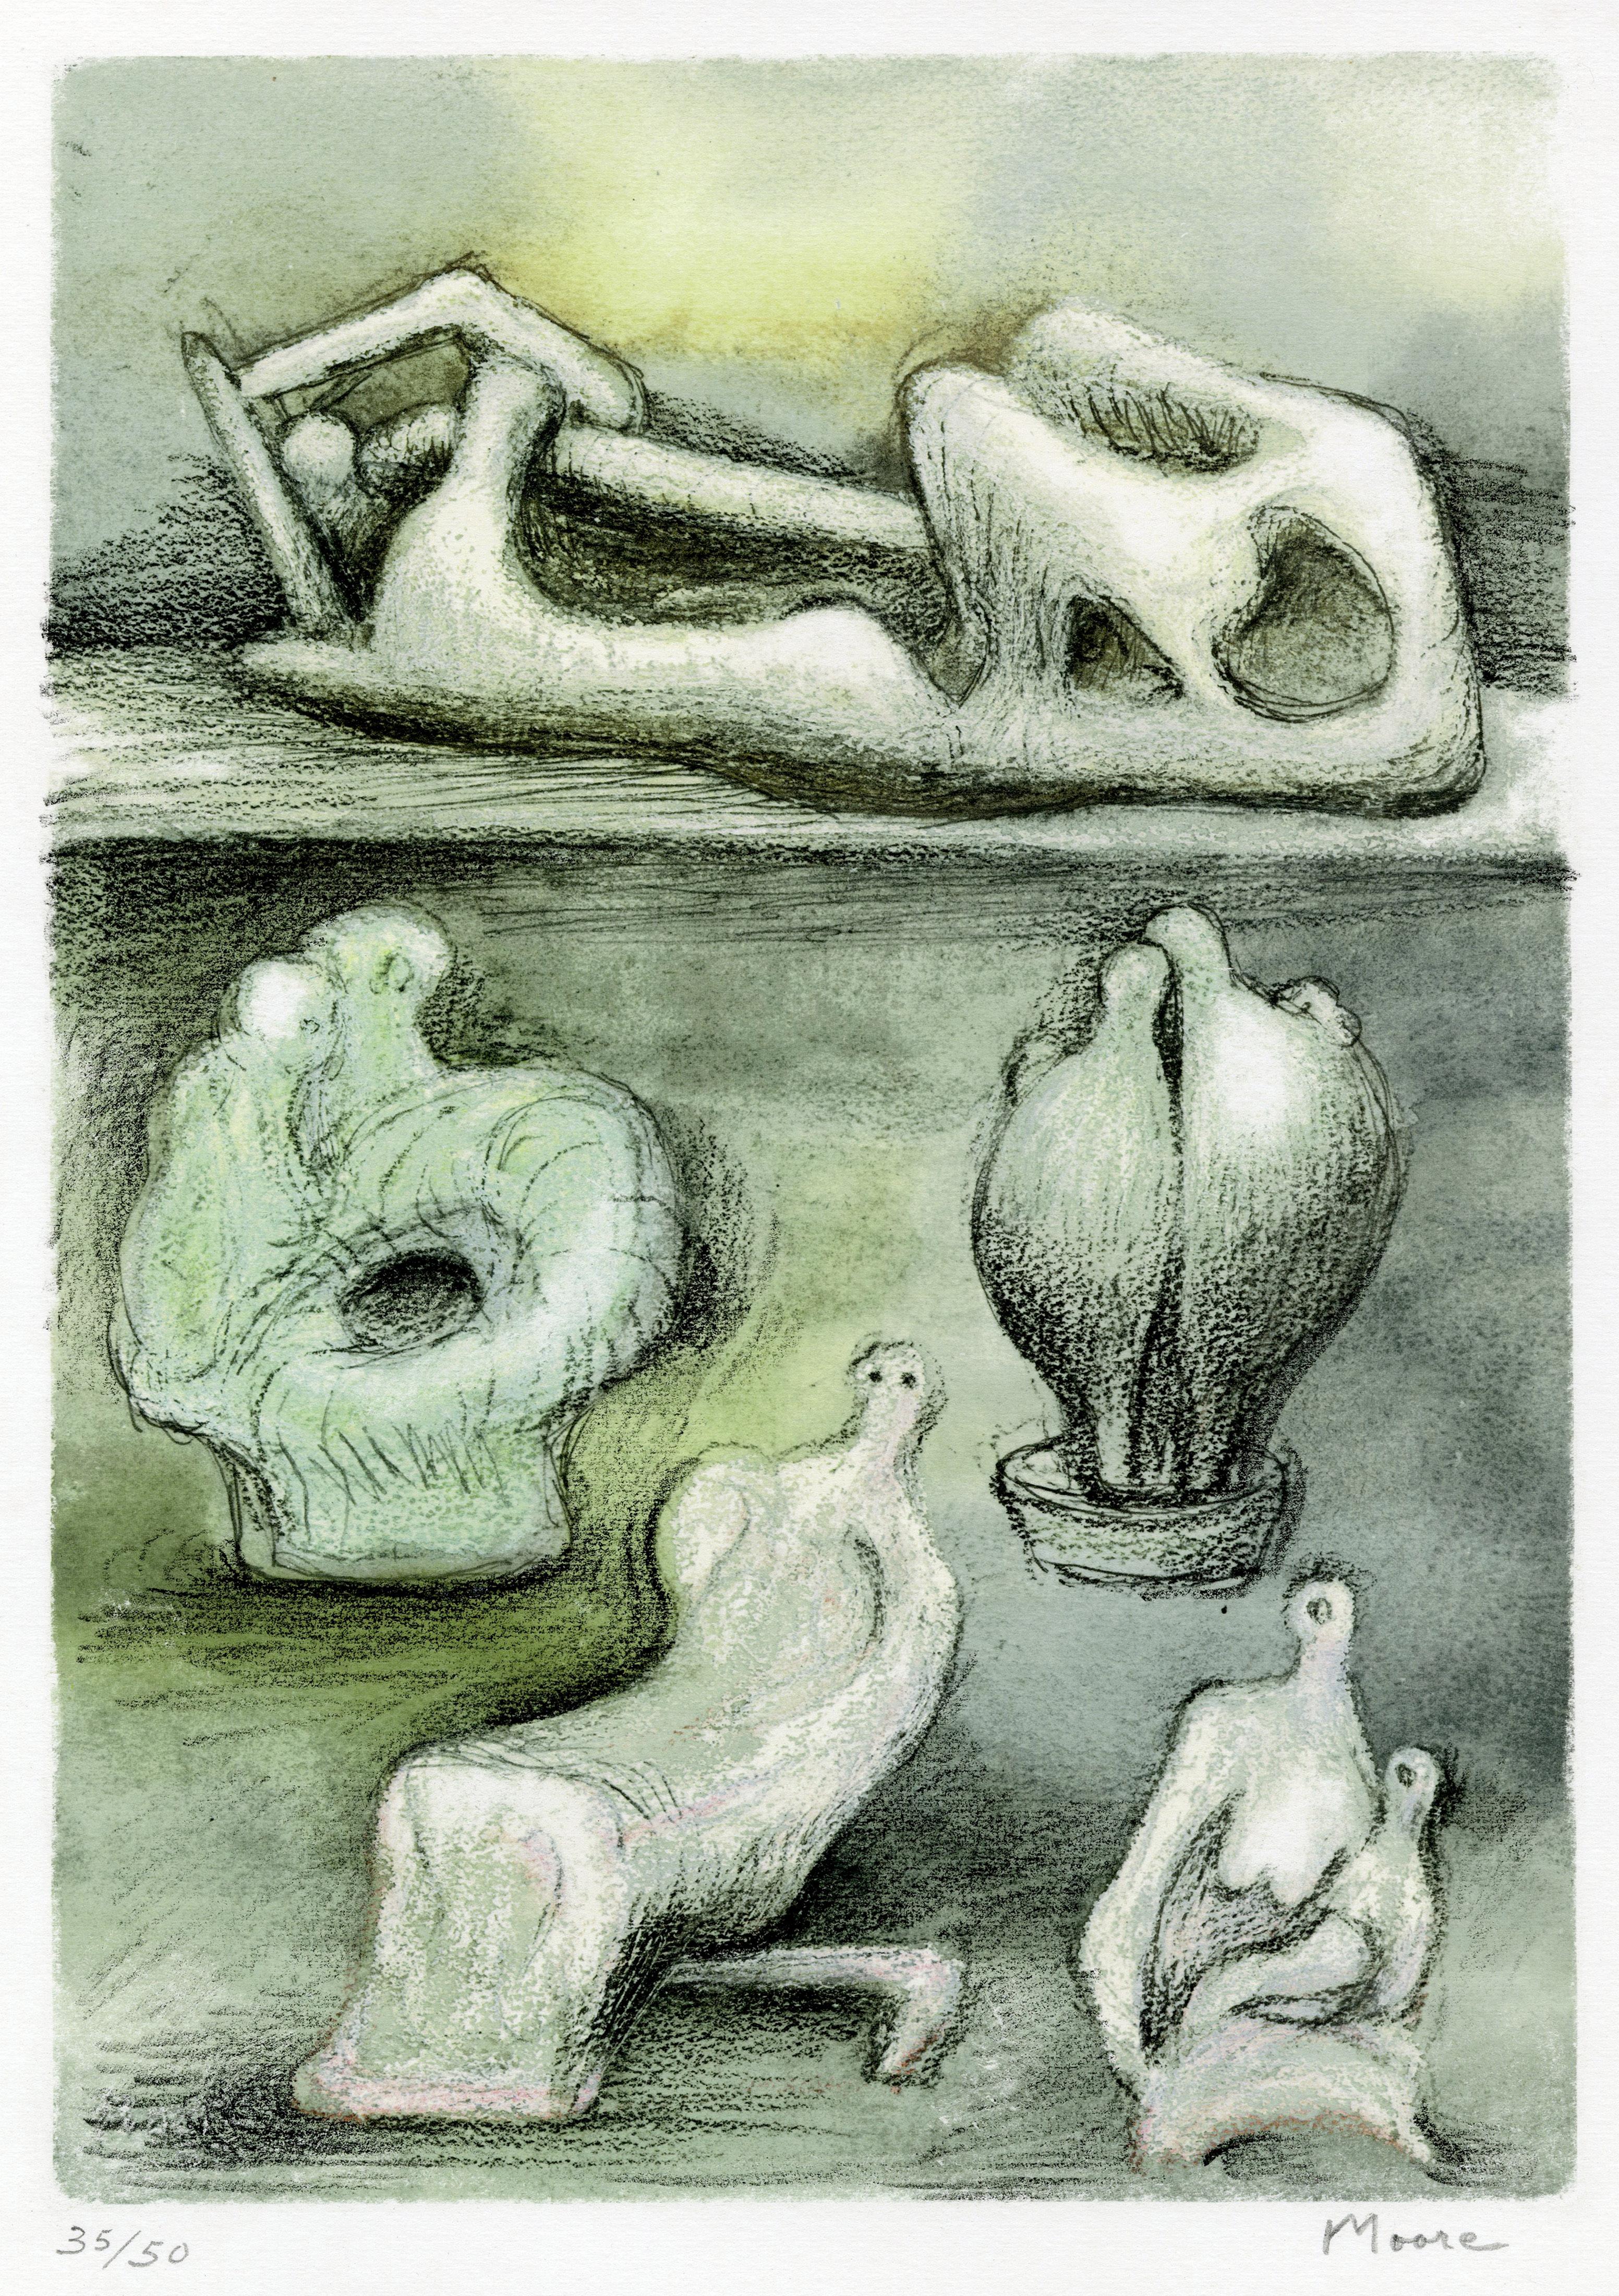 Henry Moore Abstract Print - Five Ideas for Sculpture